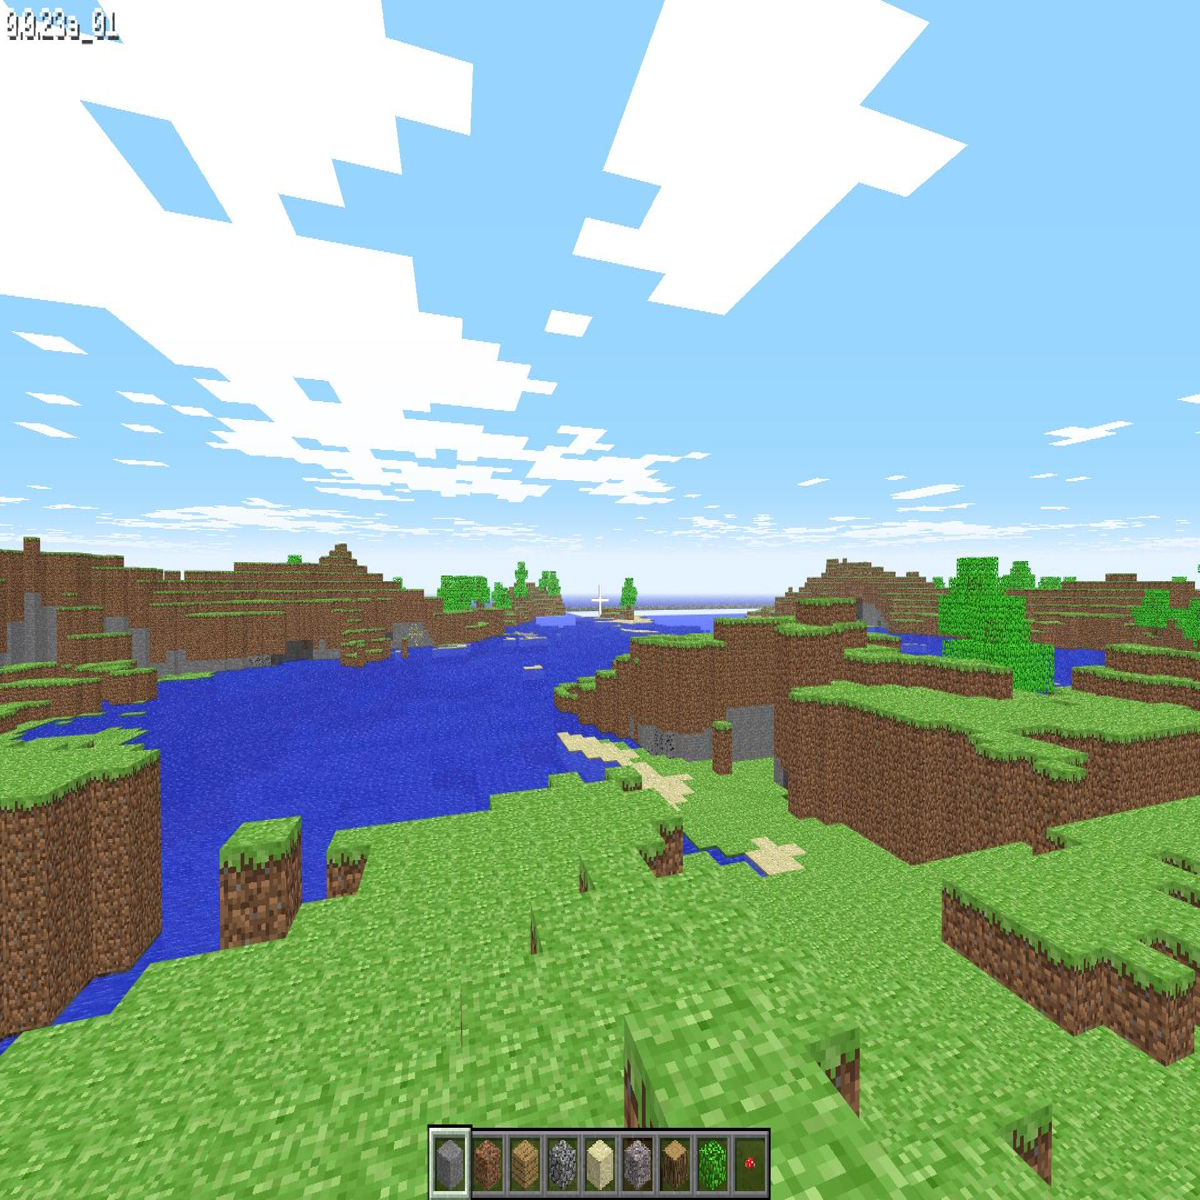 How to play classic Minecraft in a browser